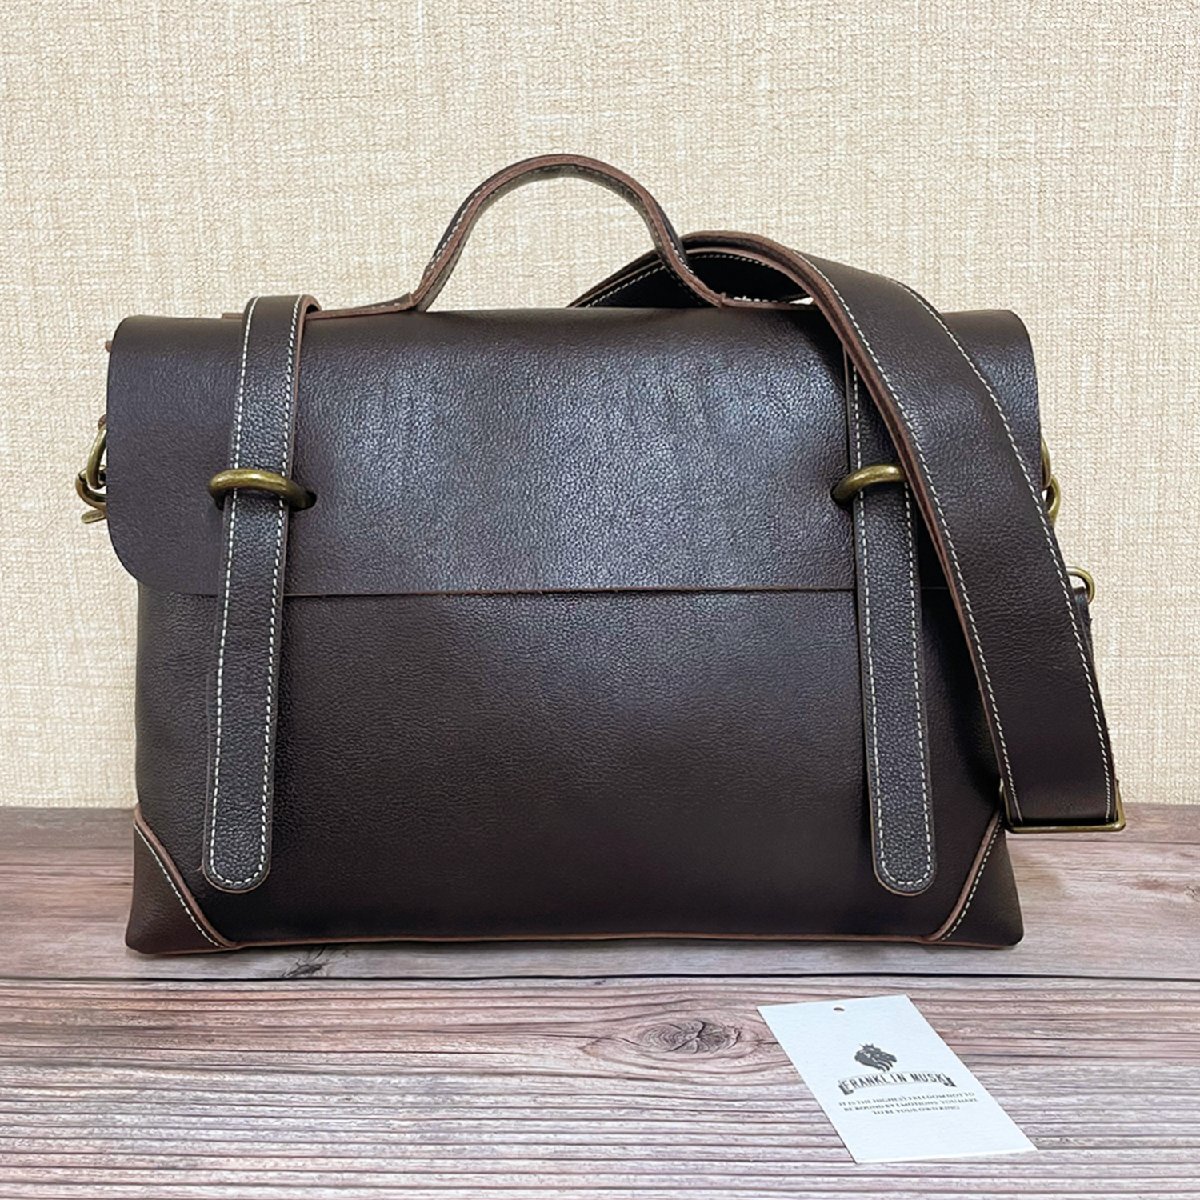  standard business bag regular price 12 ten thousand FRANKLIN MUSK* America * New York departure top class cow leather dressing up 2way tote bag formal business 